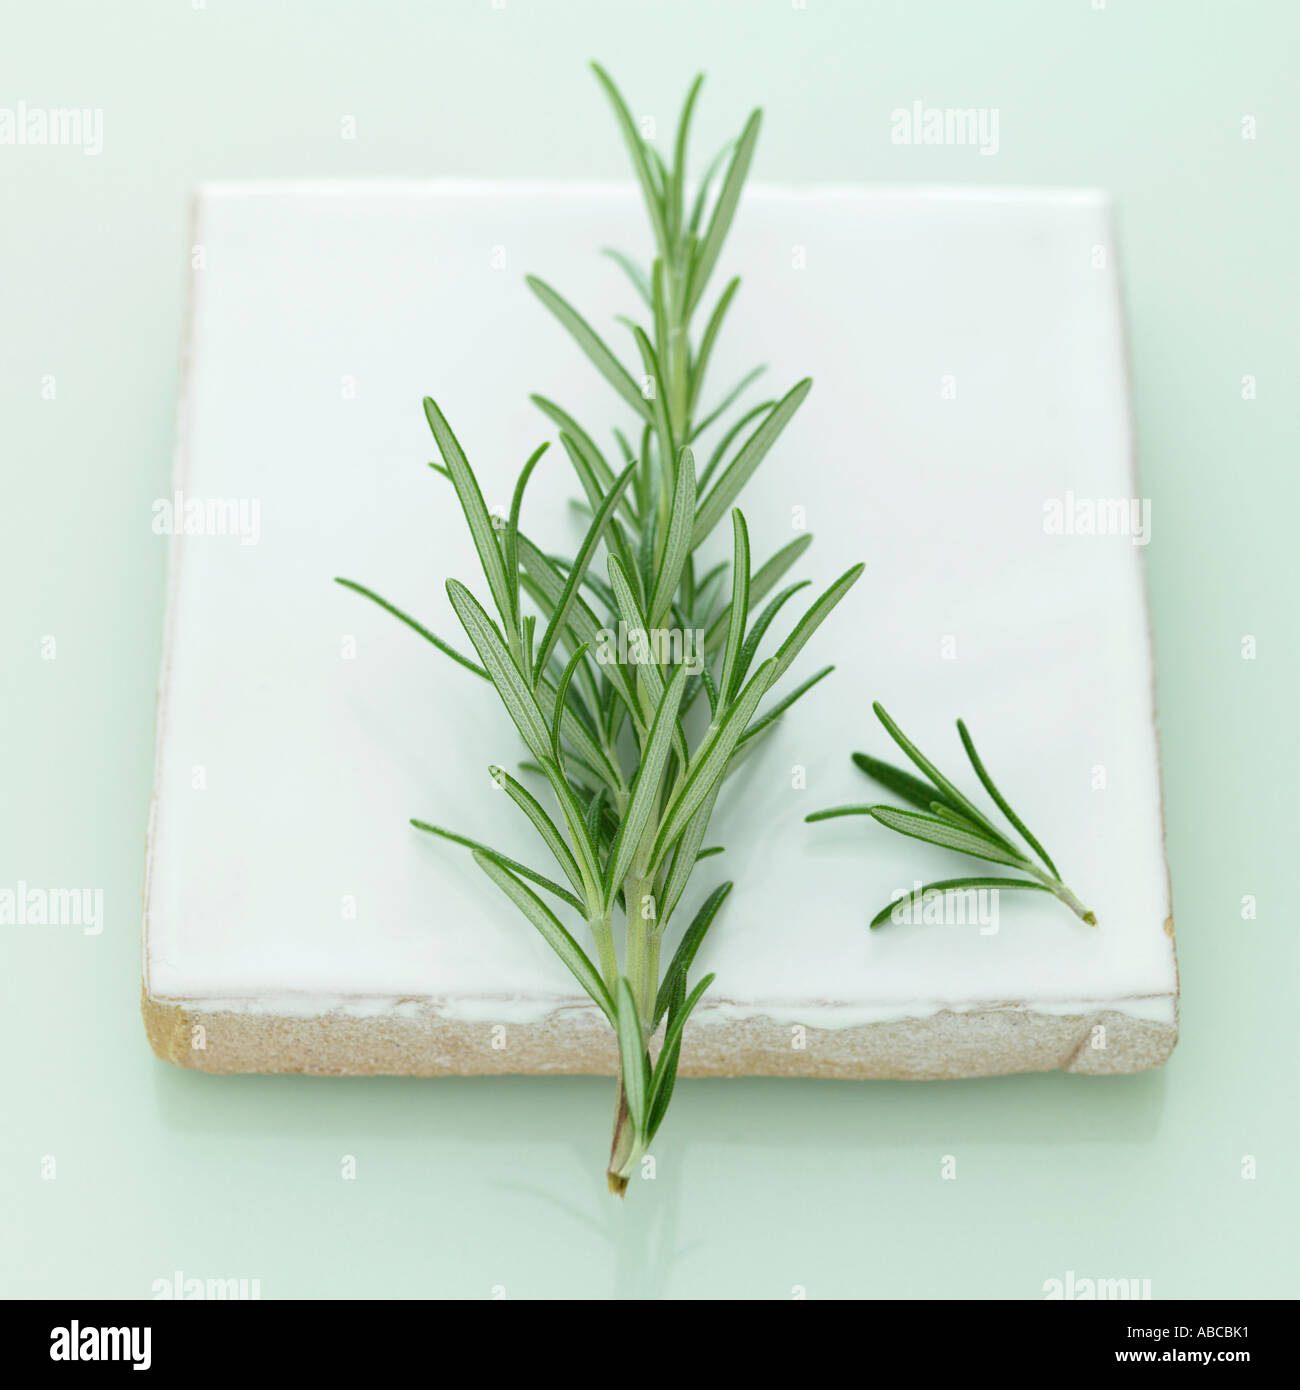 Rosemary - one of a series of similar herb images Stock Photo